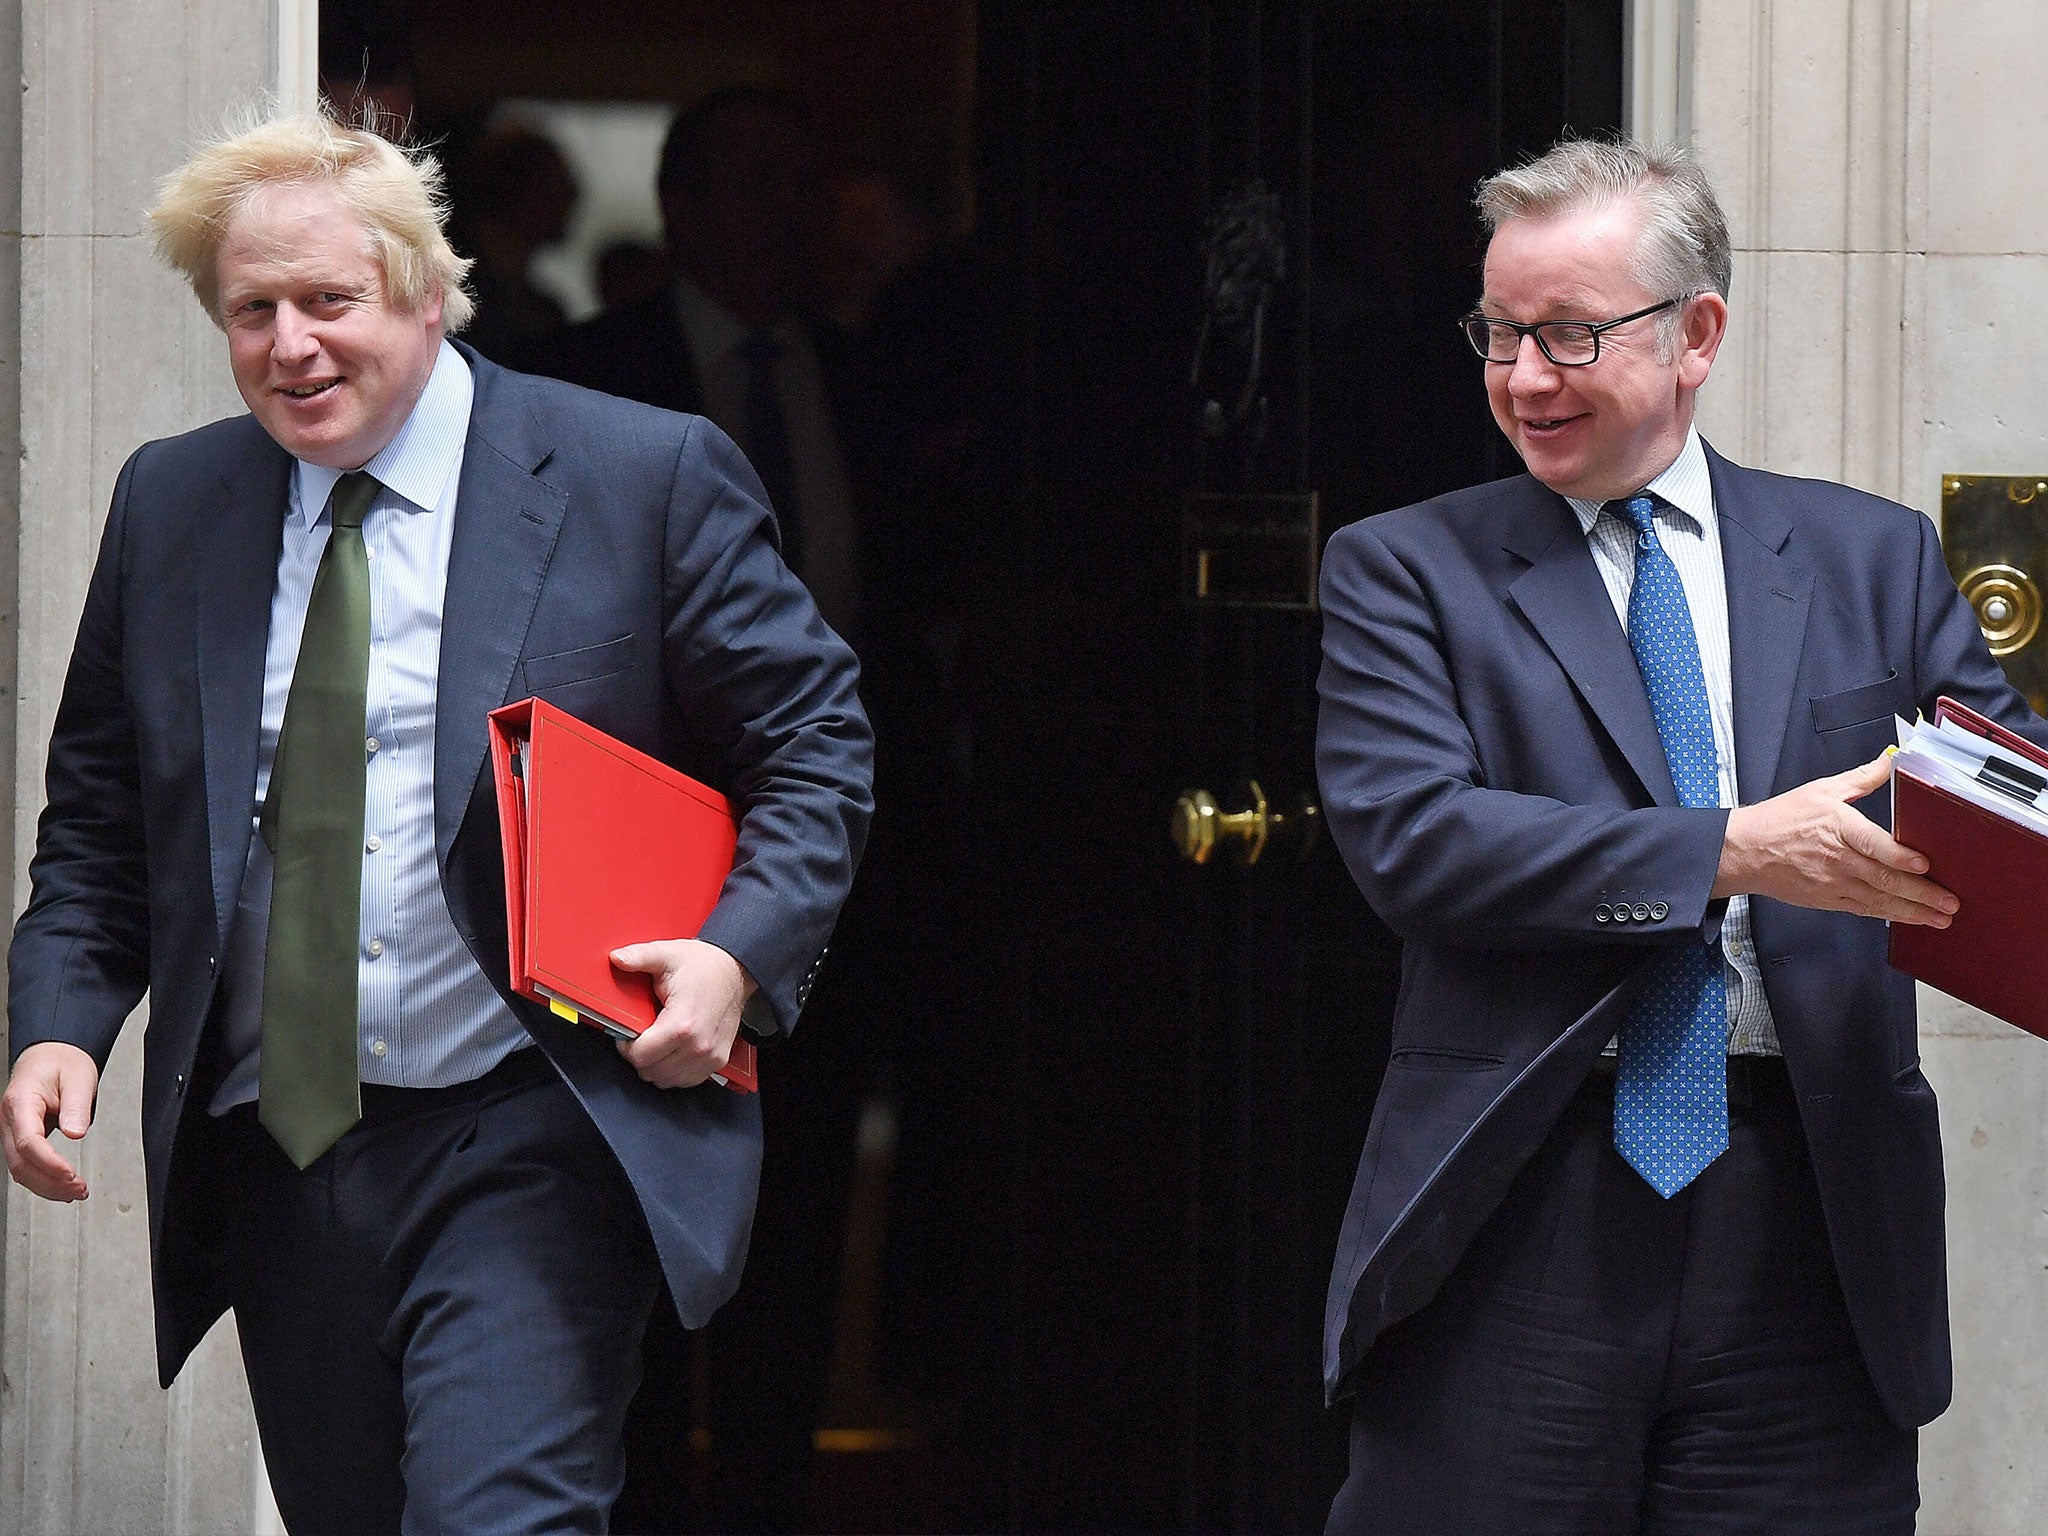 Boris Johnson and Michael Gove will go to 10 Downing Street for a Brexit Cabinet meeting